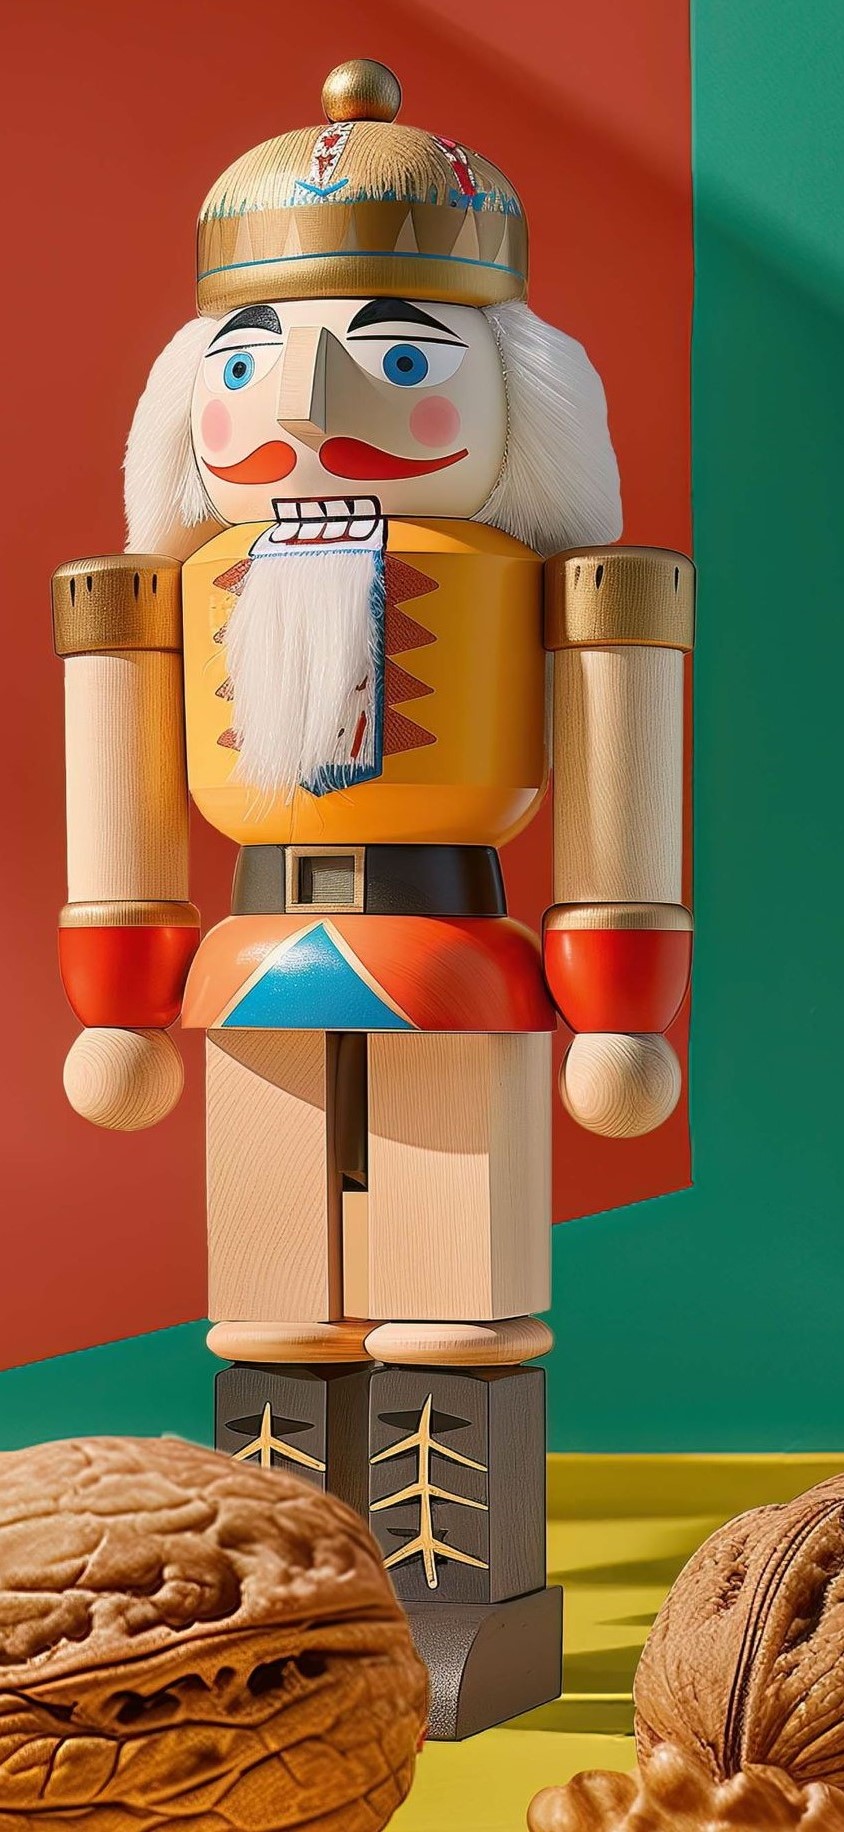 Nutcracker in the exhibition "What makes us human?"